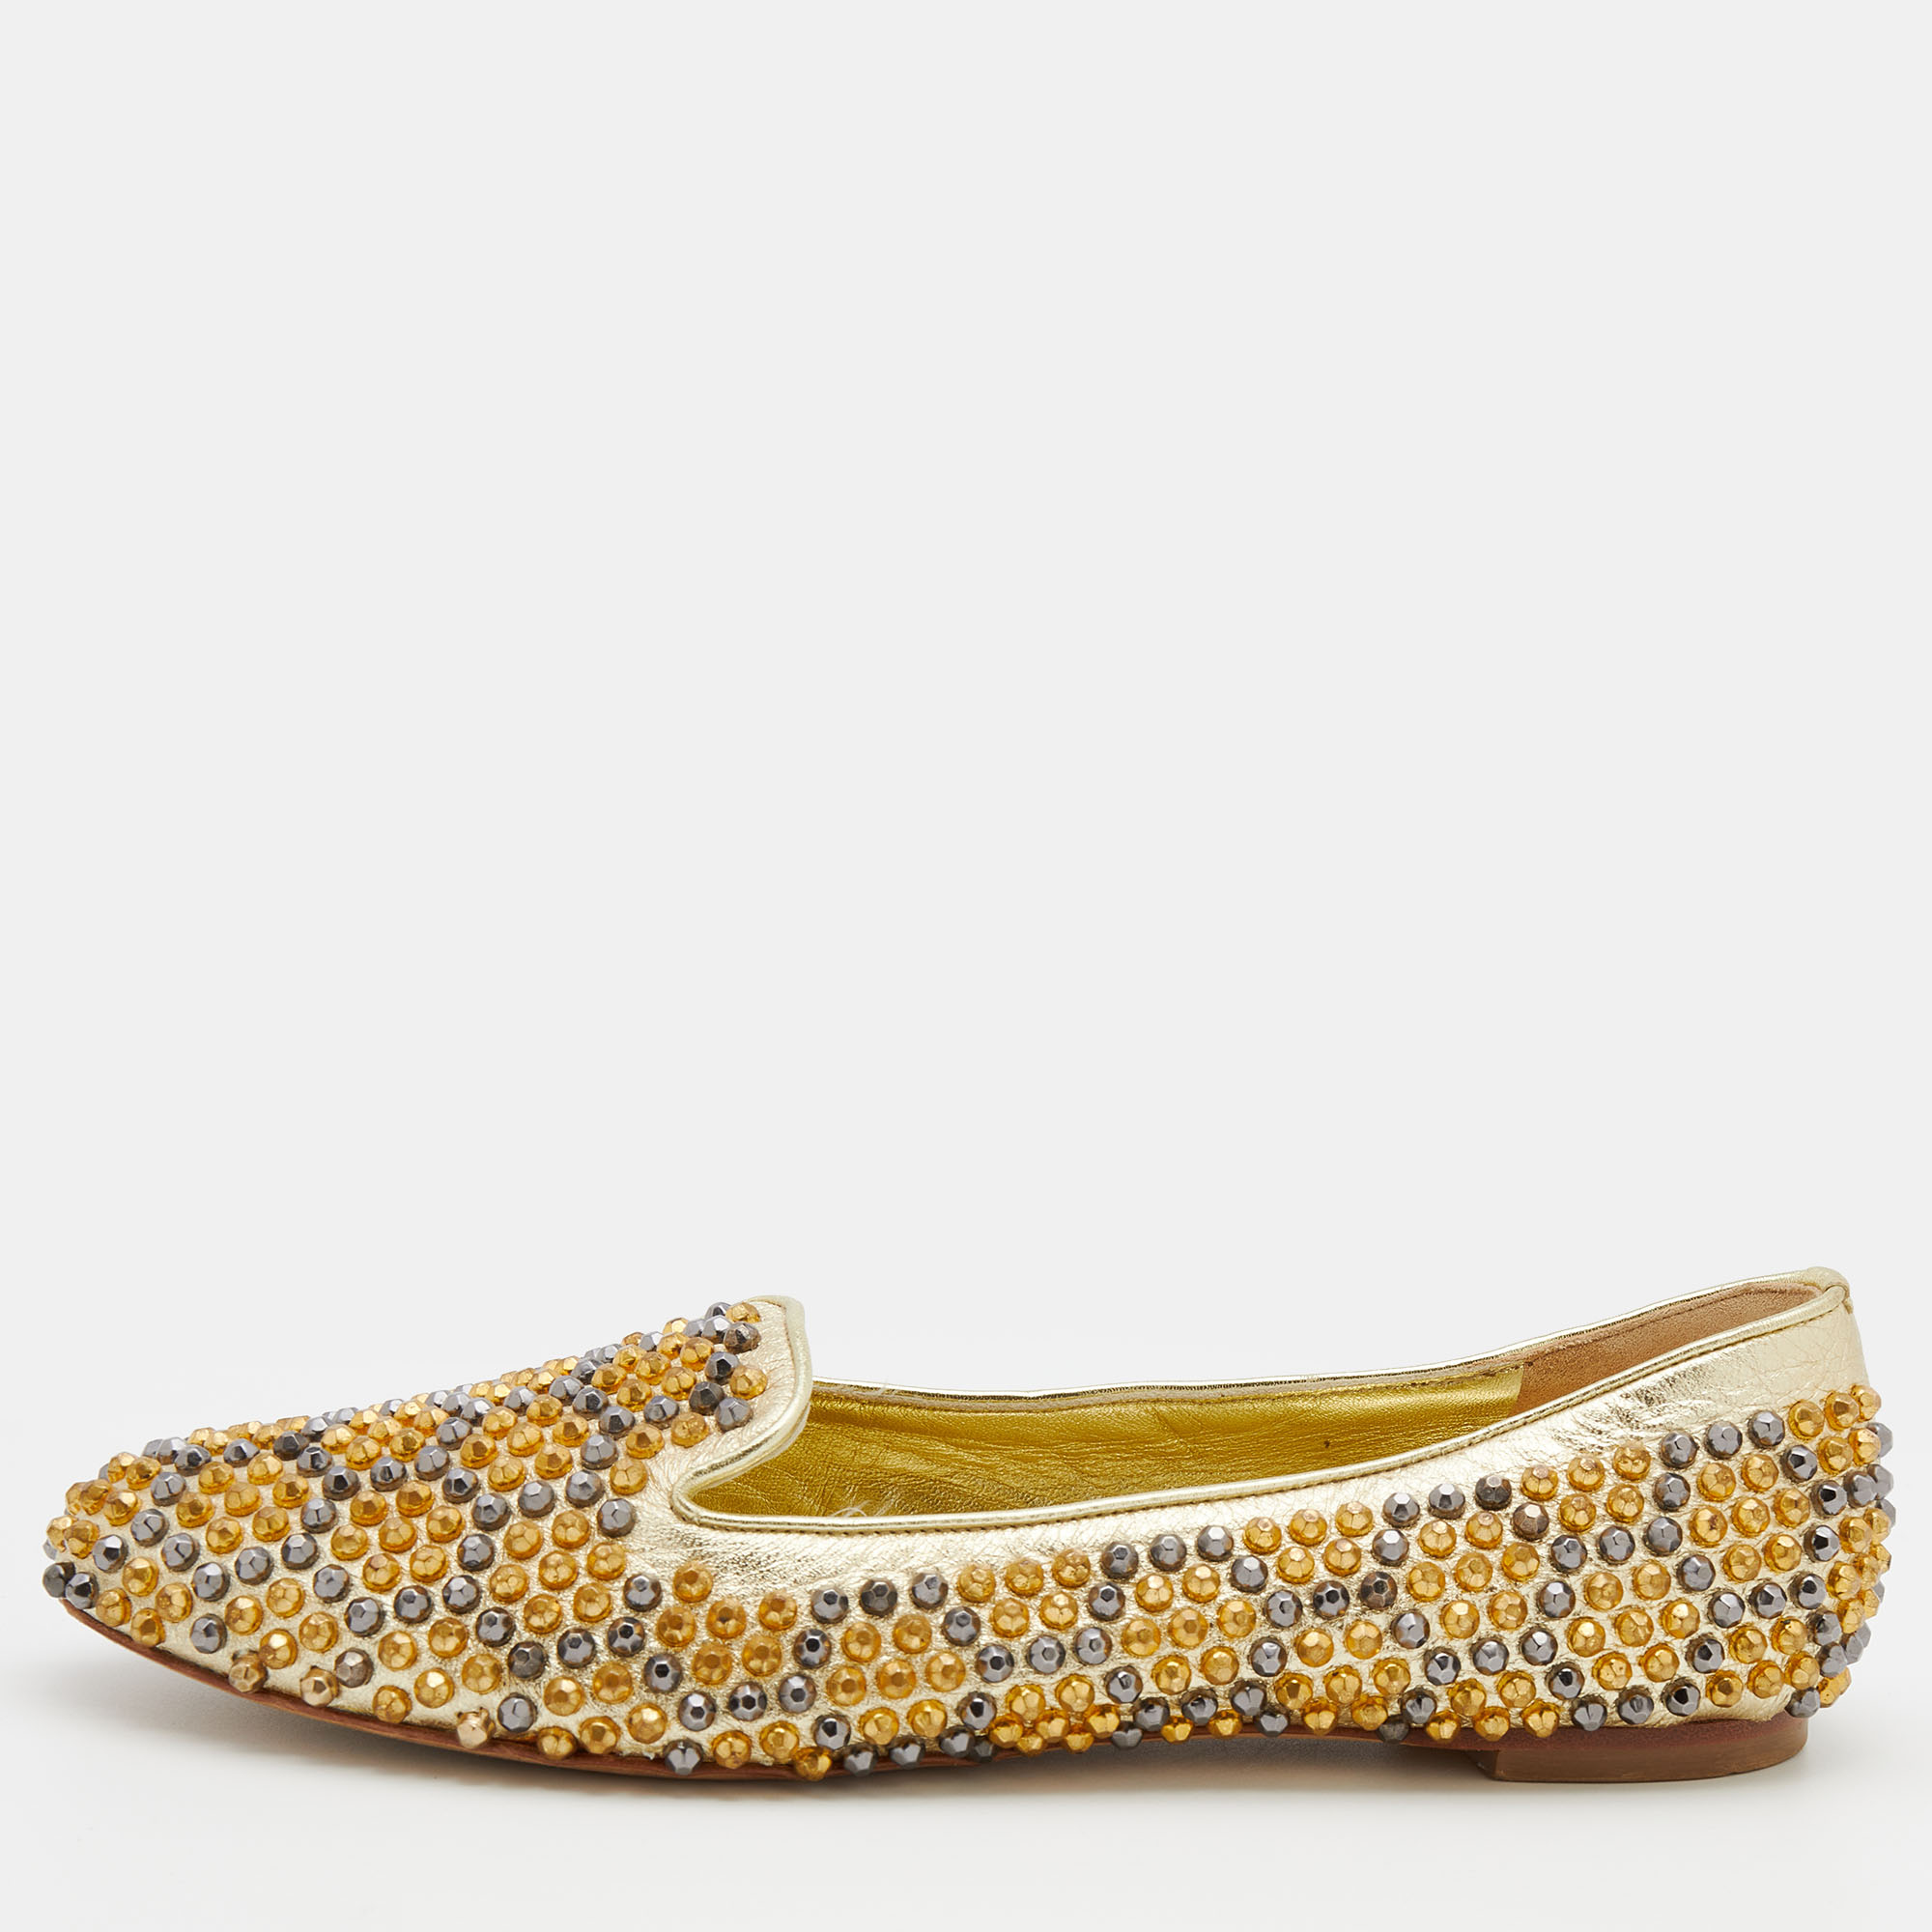 Alexander mcqueen metallic gold leather stud embellished smoking slippers size 38